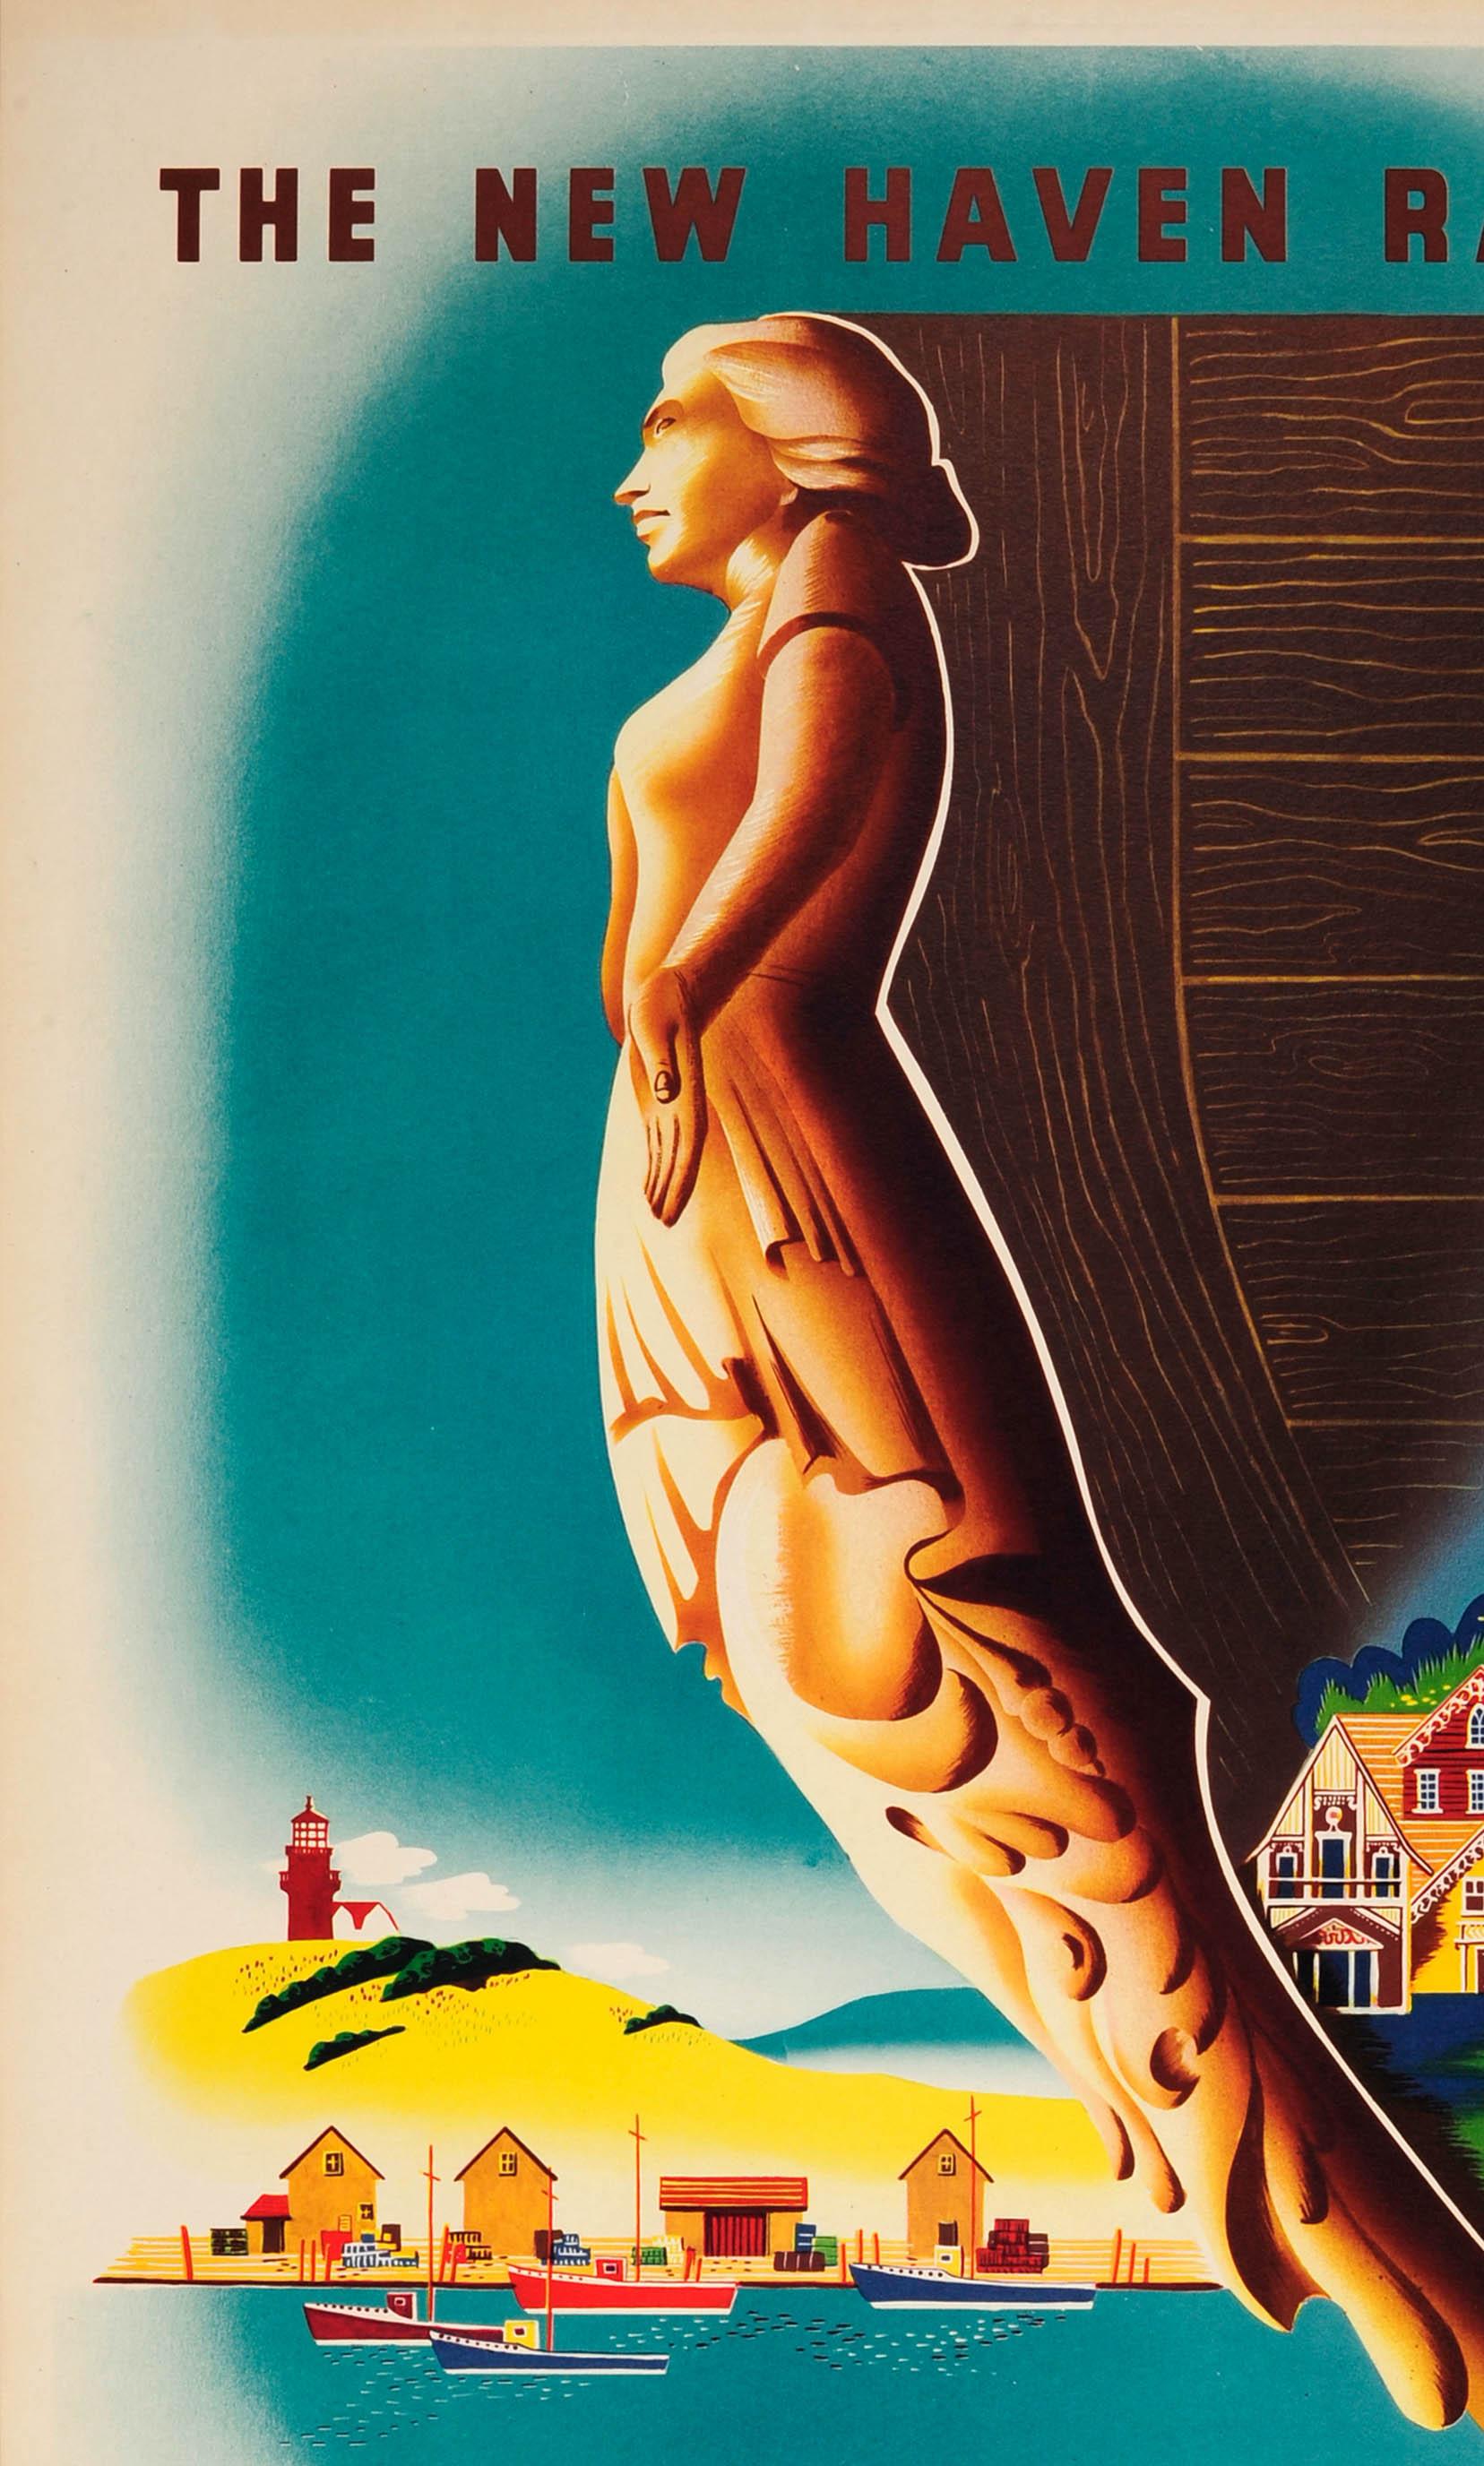 Original vintage travel poster for Martha's Vineyard published by The New Haven Railroad featuring a bold illustration of a figurehead in front of a shoreline with colorful houses, children playing on the beach and in the water, boats and a